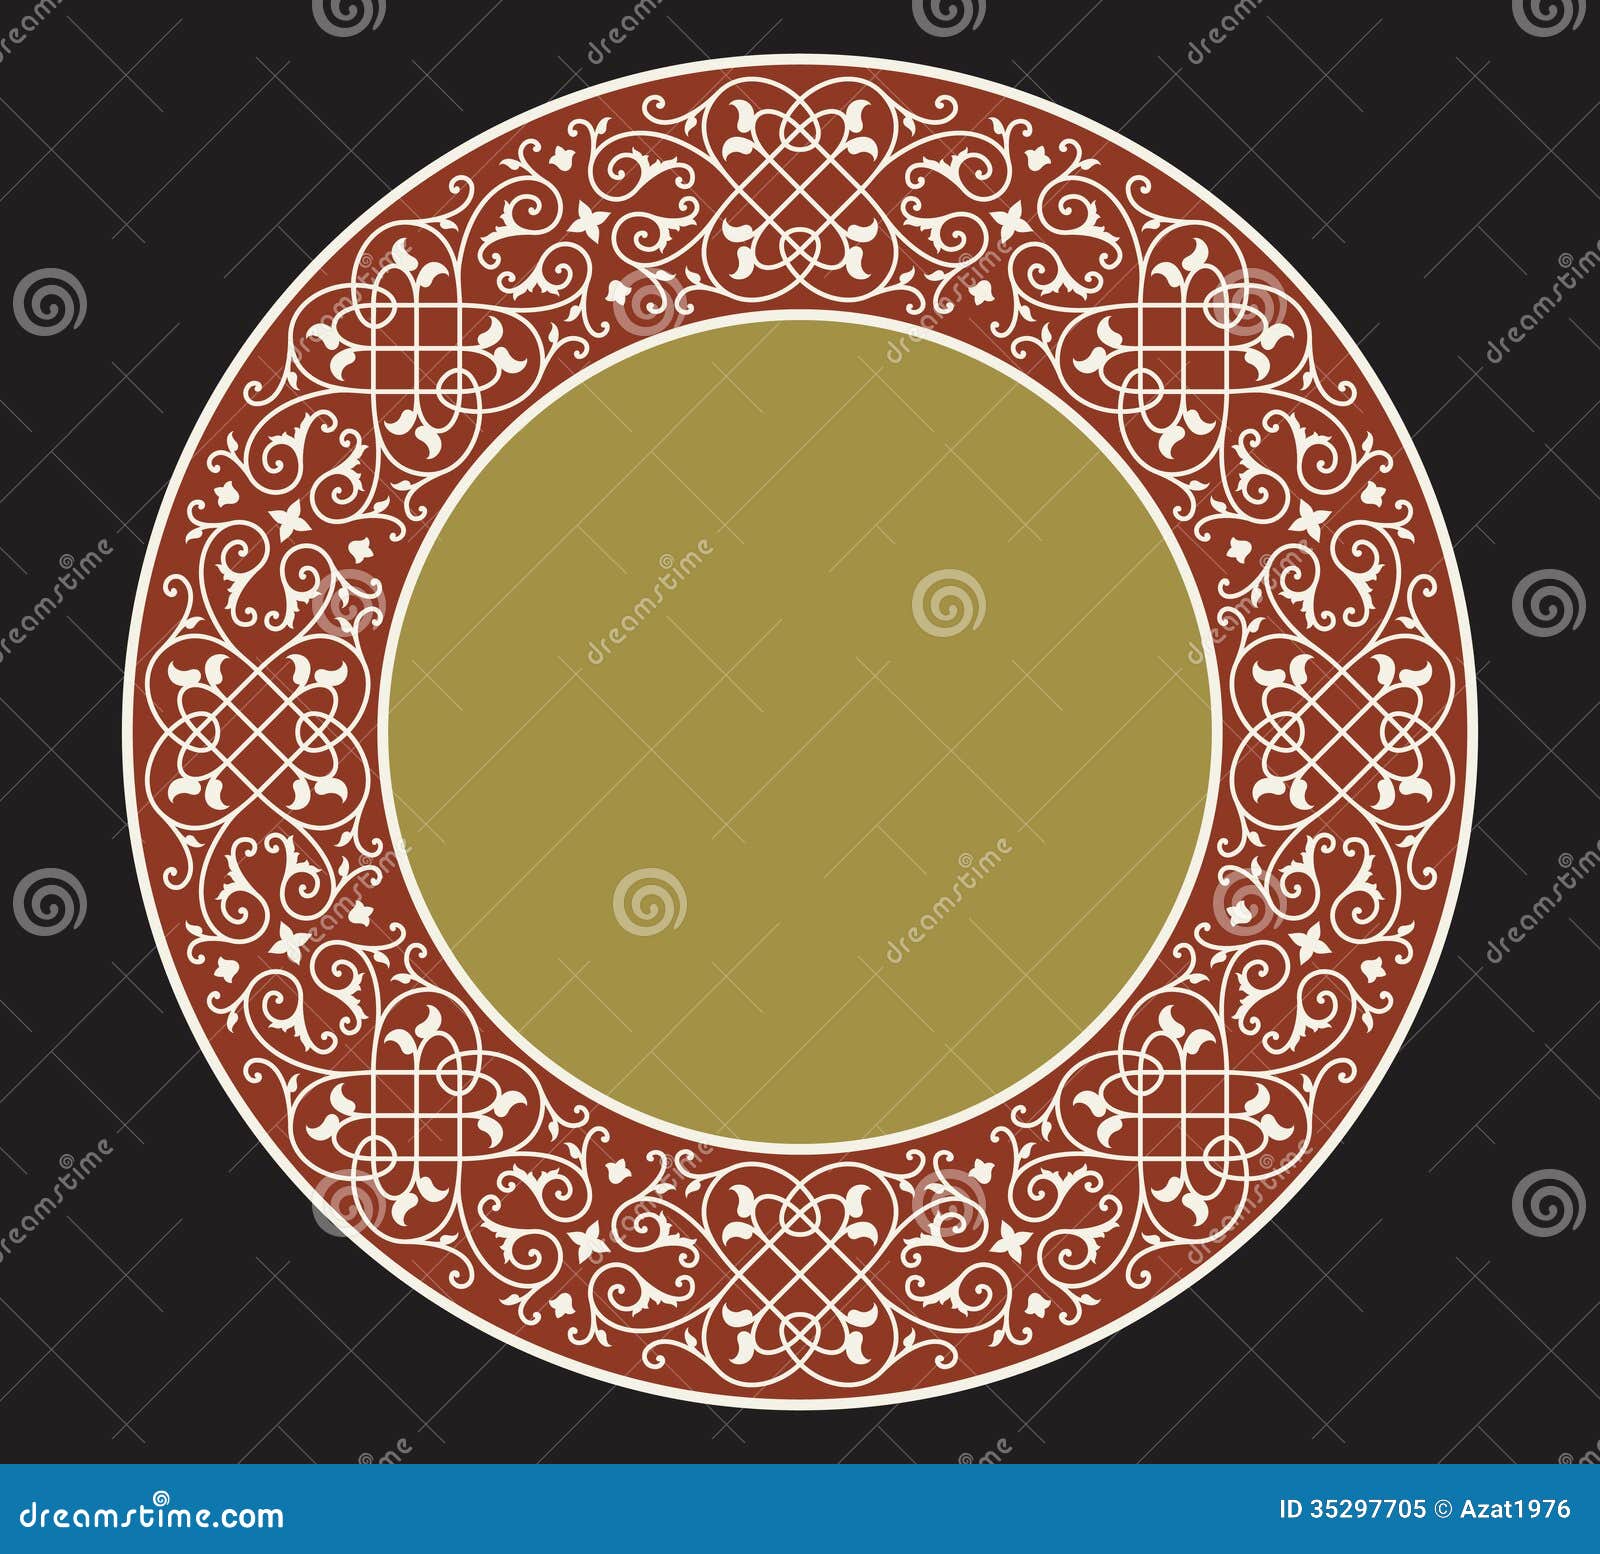 Milan Saucer Ornament Two Royalty Free Stock Photo - Image: 35297705